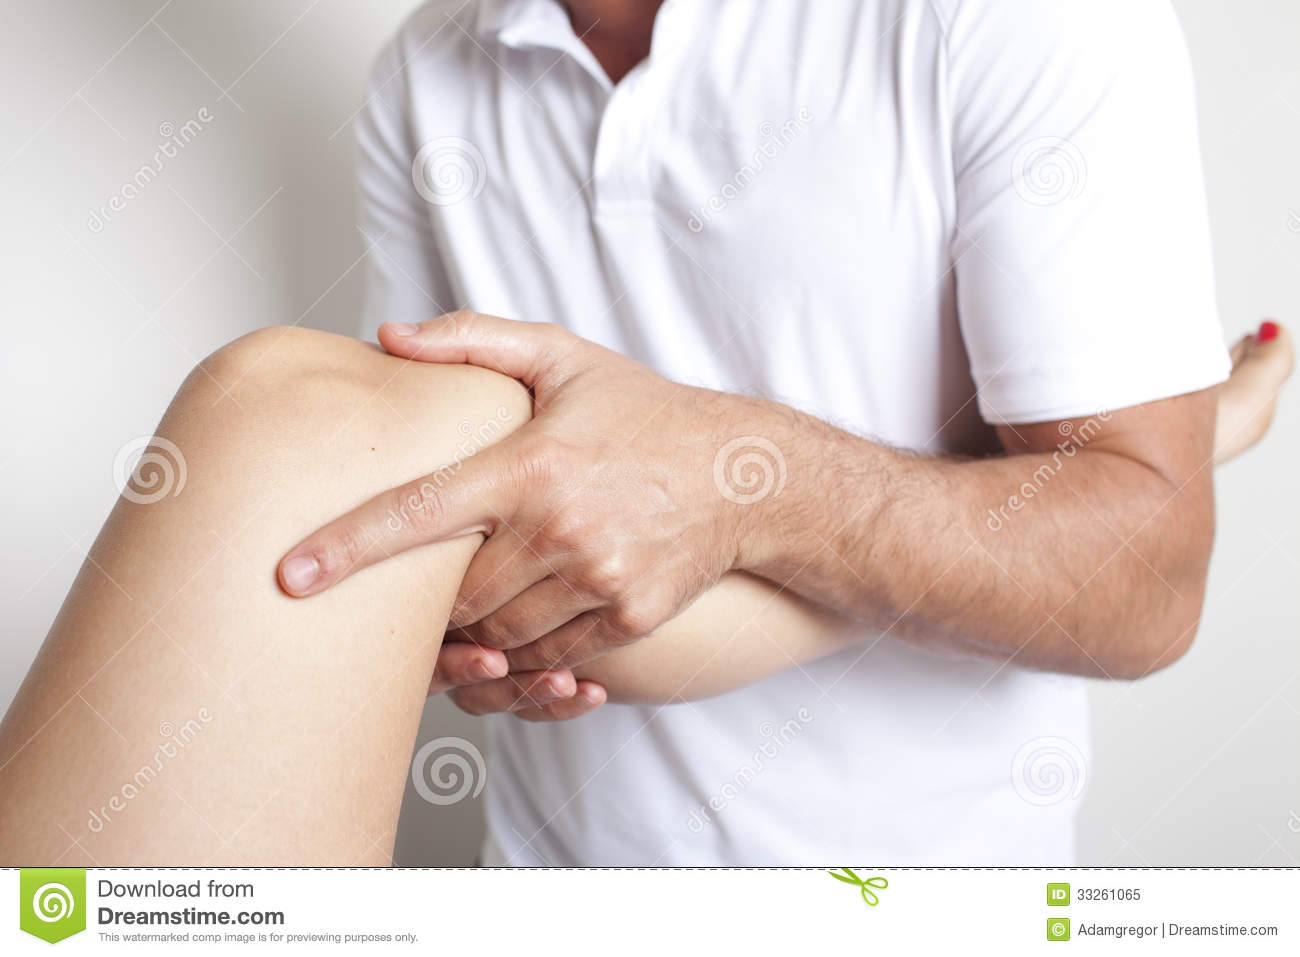 Physiotherapy Royalty Free Stock Photo   Image  33261065